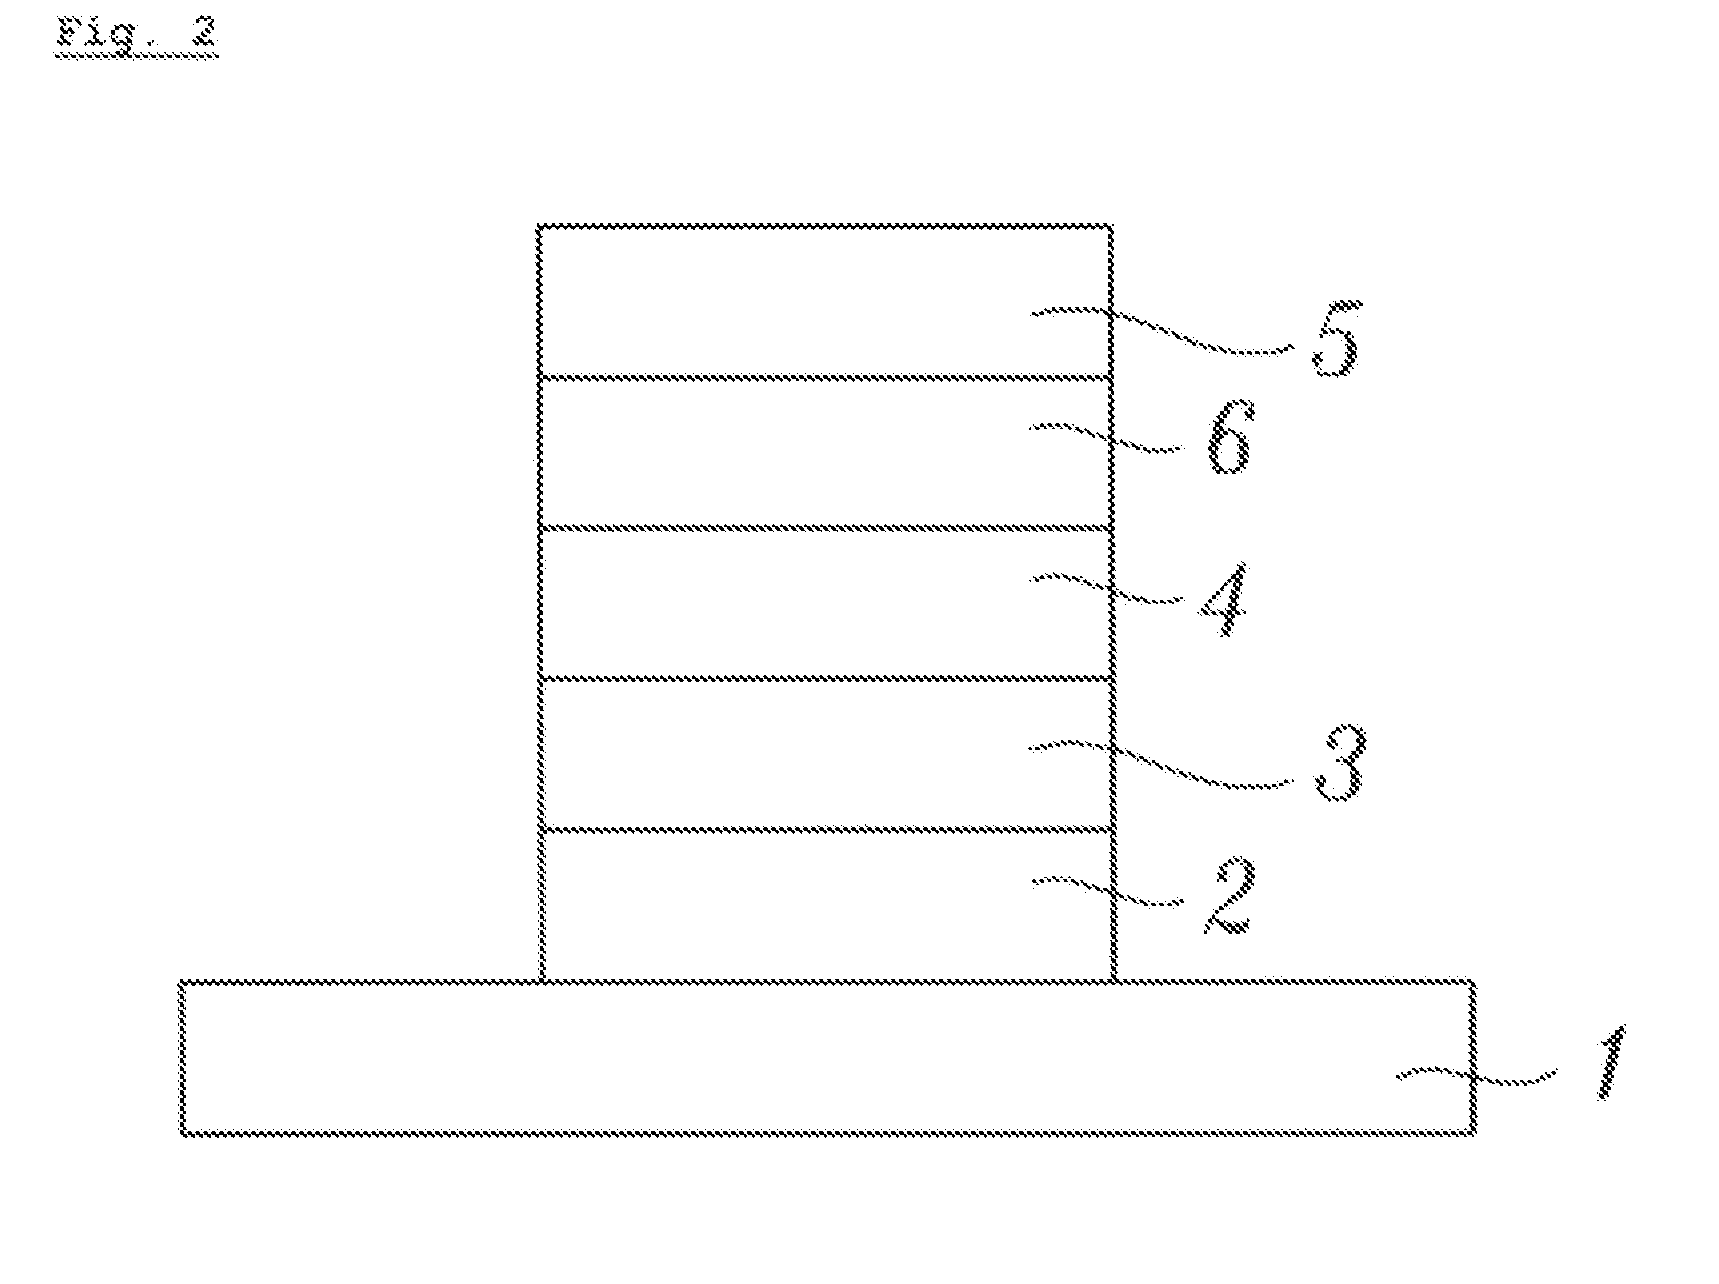 P-type NiO conducting film for organic solar cell, a method for preparation of NiO conducting film, and an organic solar cell with enhanced light-to-electric energy conversion using the same